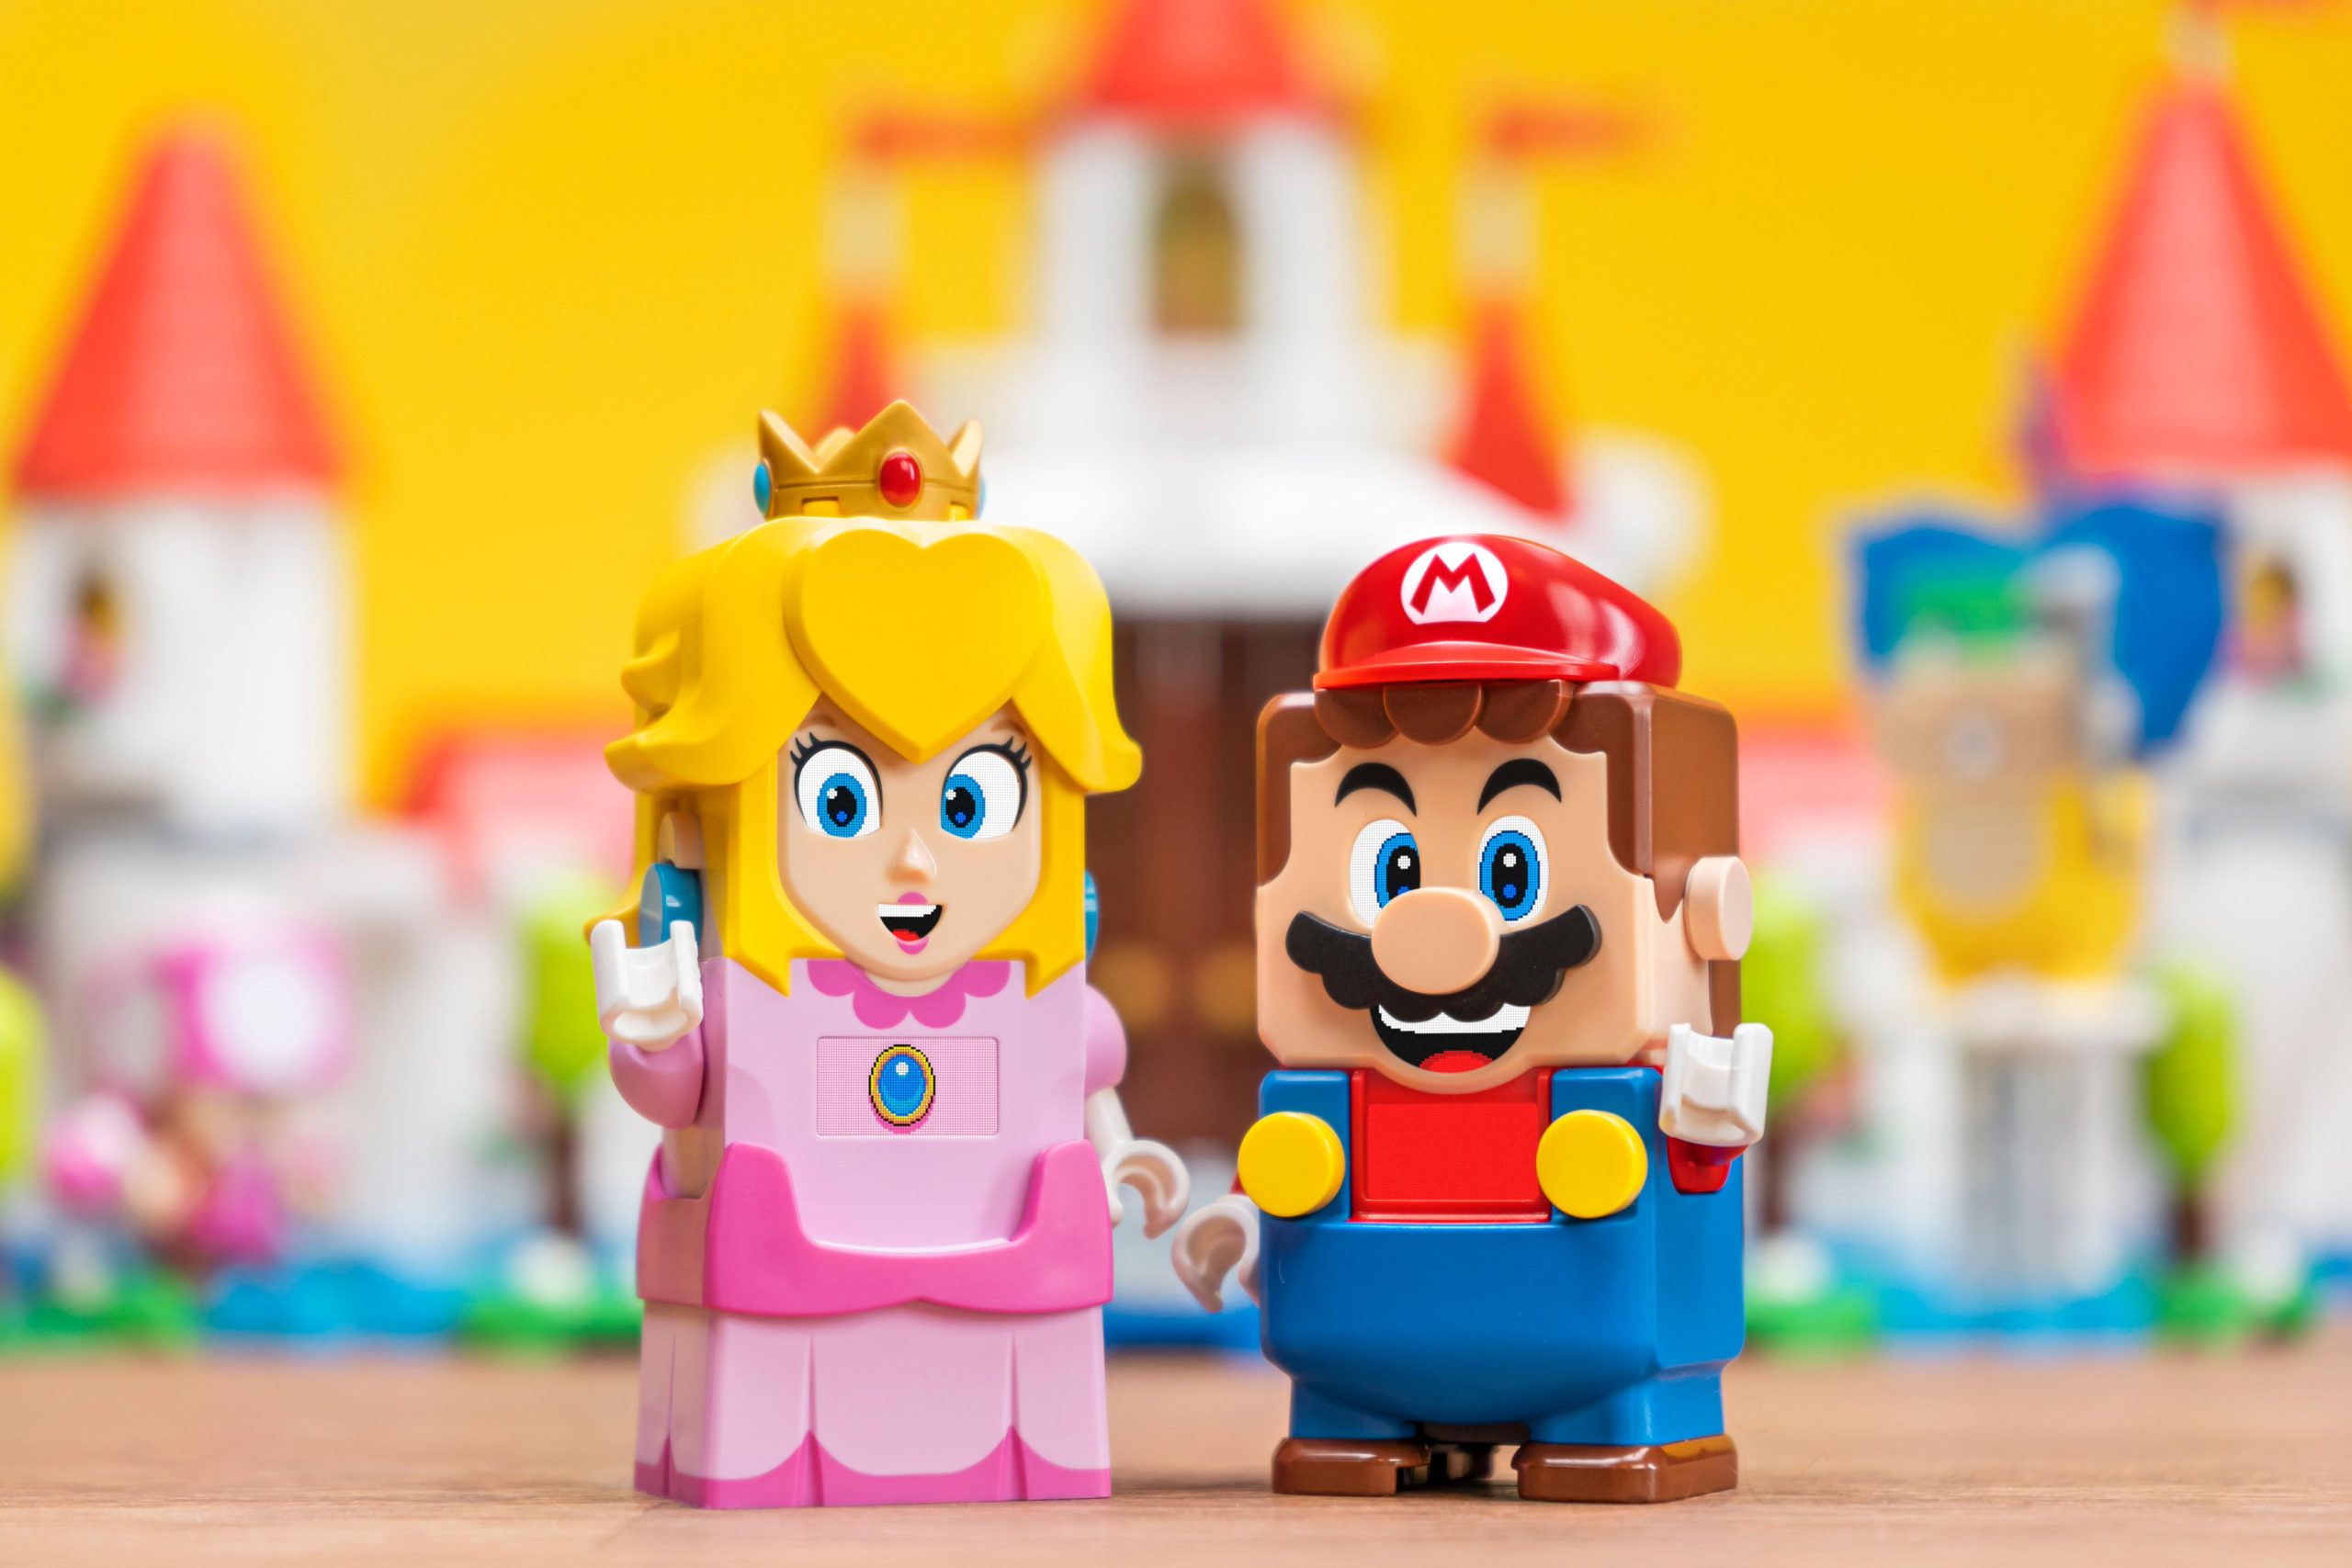 Hide the Princess in your own LEGO castle